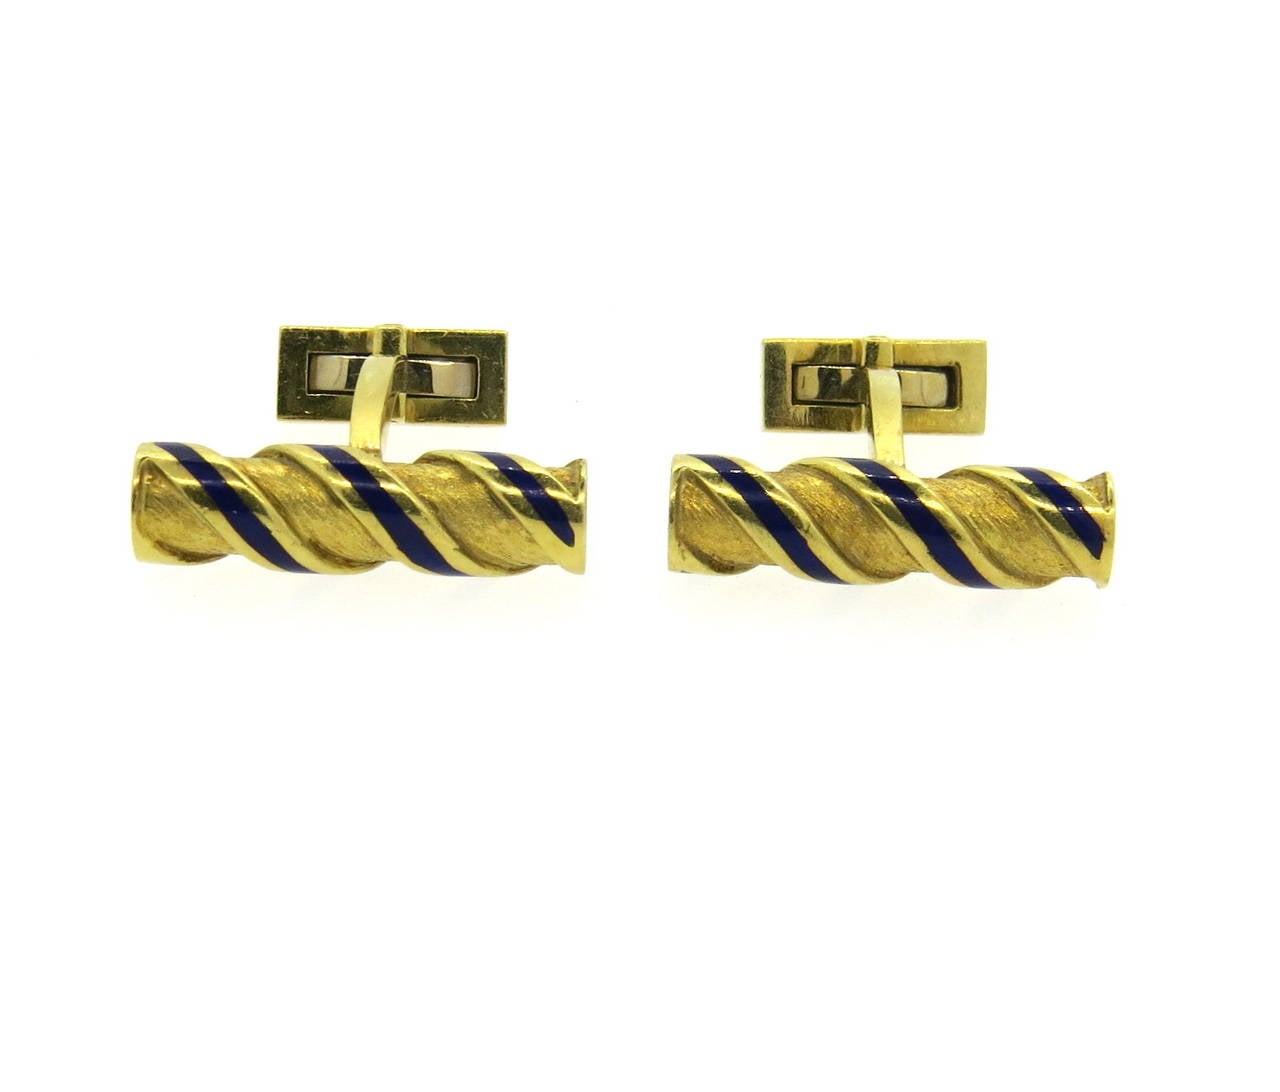 18k gold classic cufflinks, decorated with blue enamel. Cufflink top measures 24mm x 6mm. Weight - 20.1 grams